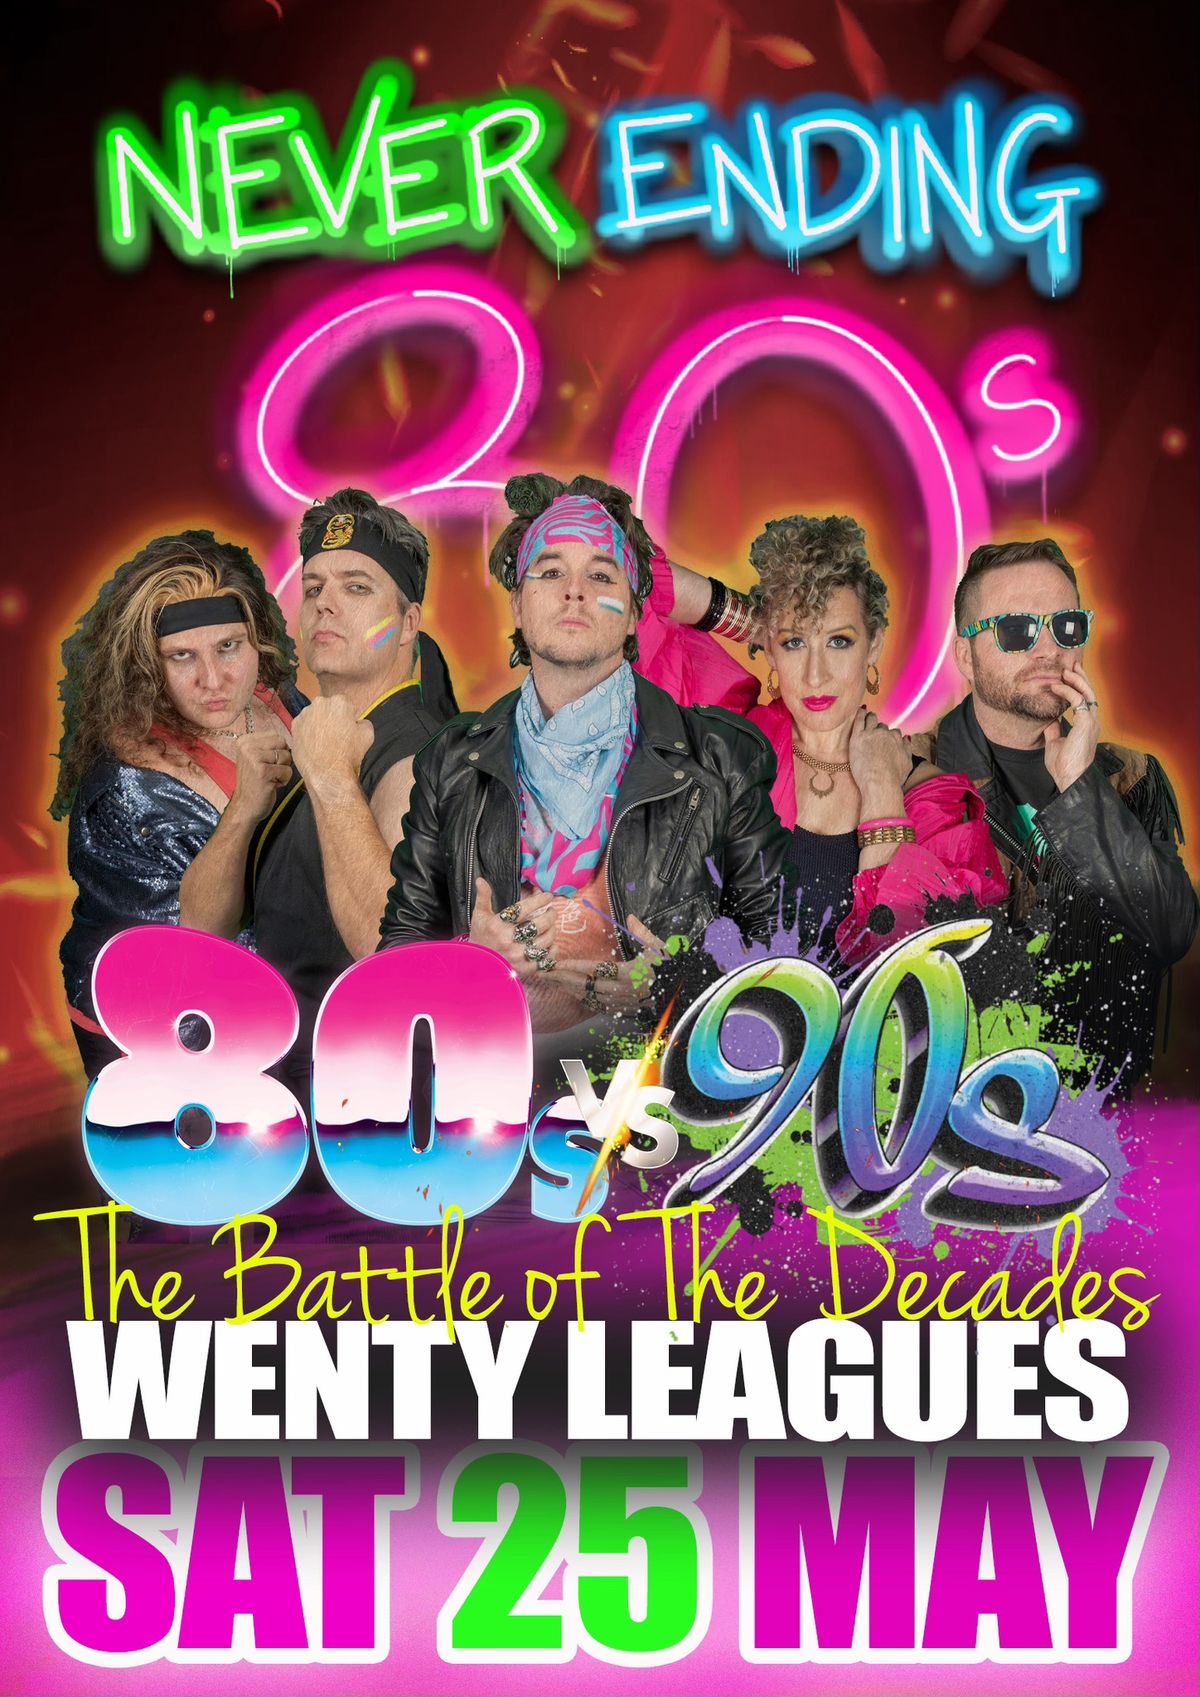 Never Ending 80s v 90s Party - Wenty Leagues 